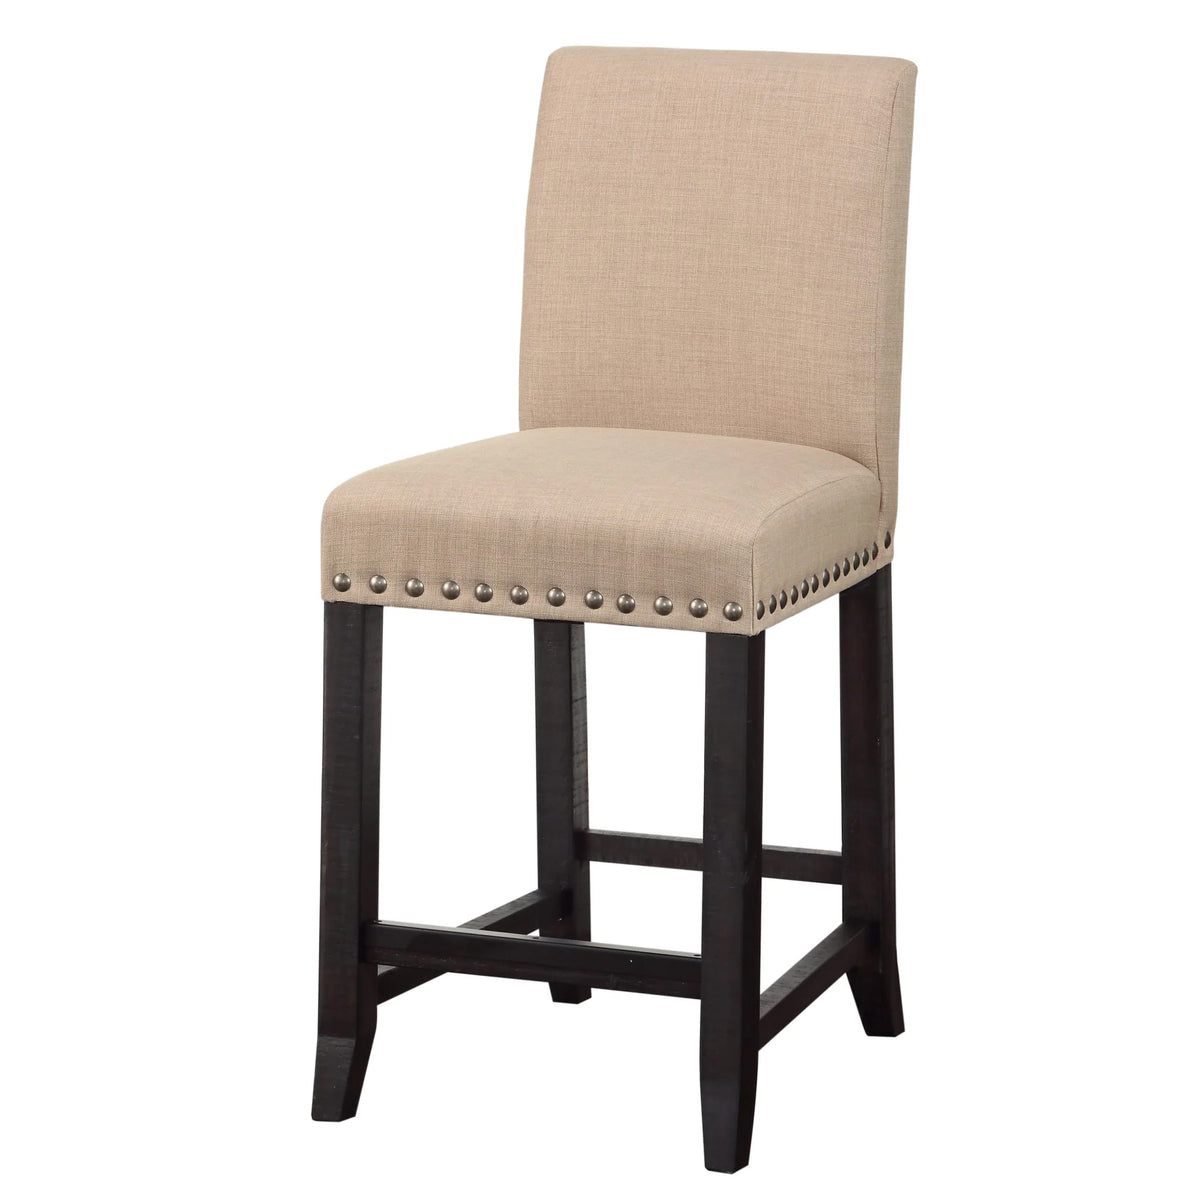 Fabric Upholstered Wooden Counter Height Stool with Nail head Trim, Set of 2,  Brown - BM187613